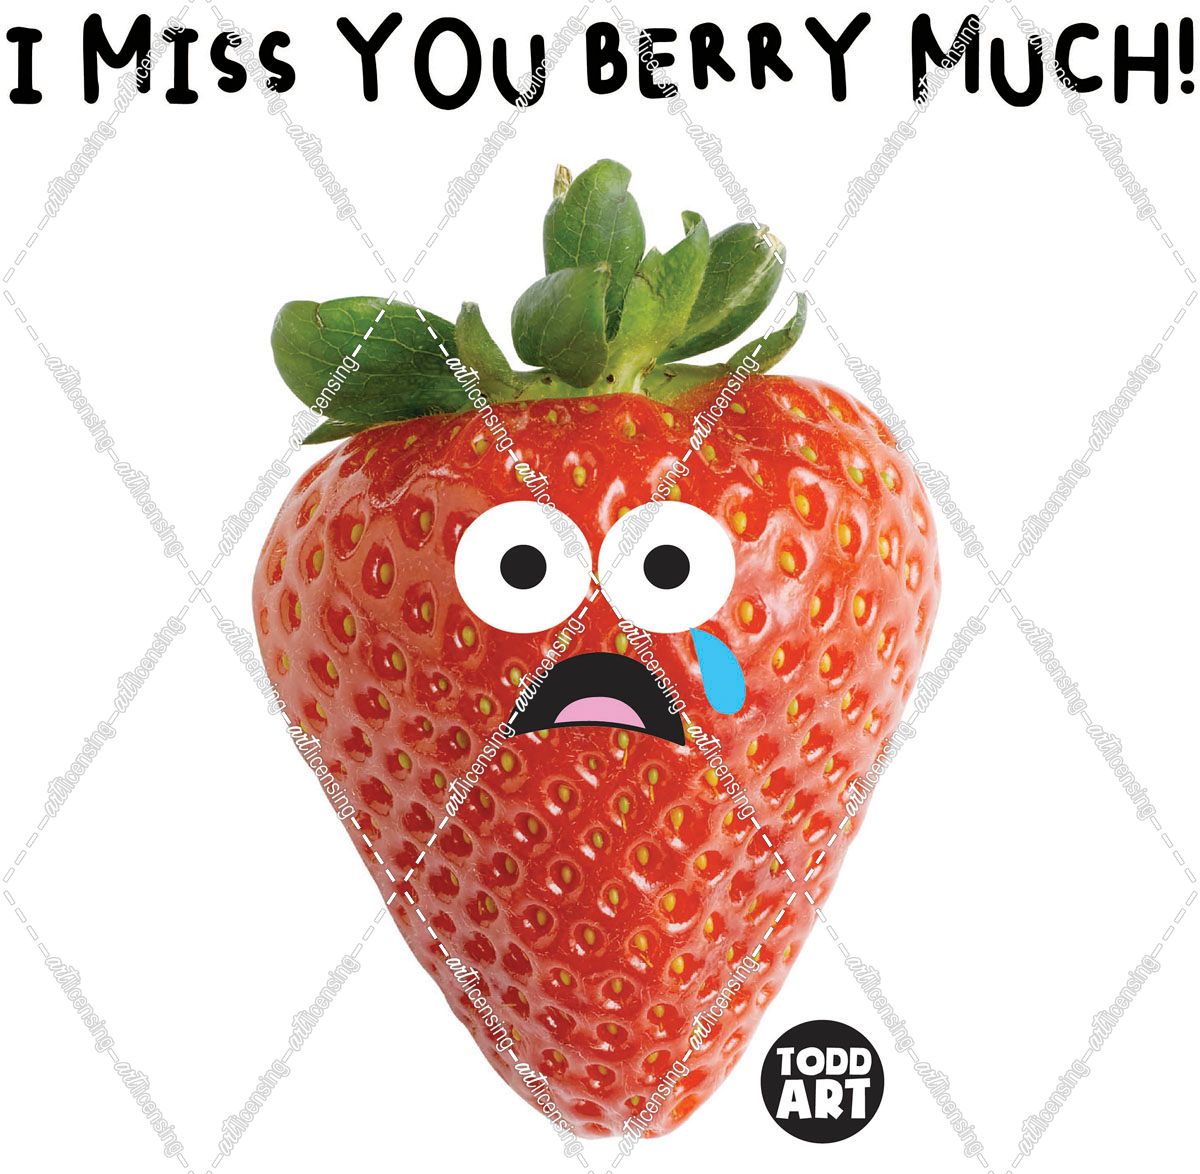 Food Attitude – Miss You Berry Much